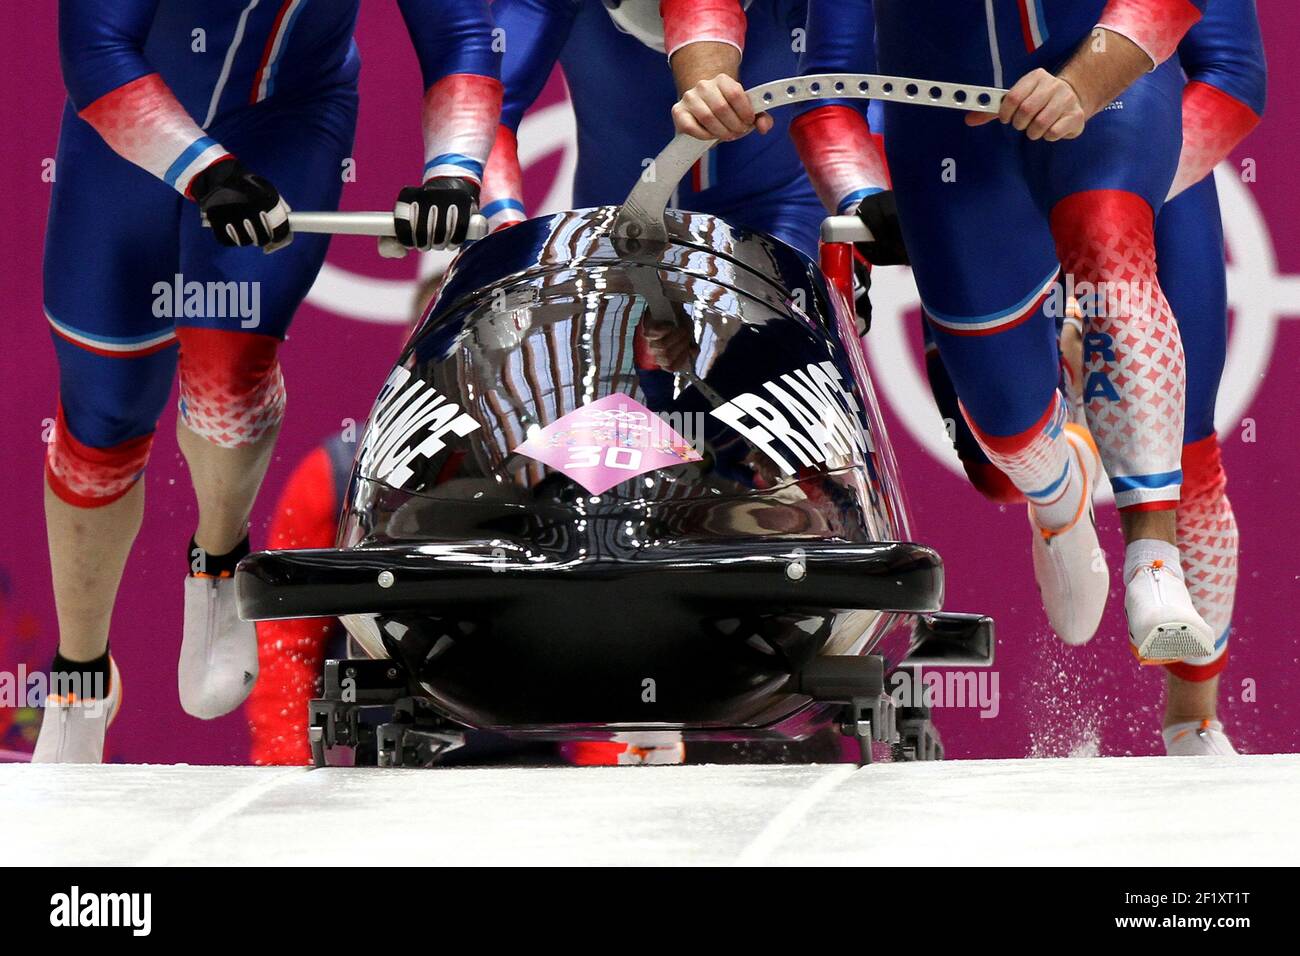 France 2 (Godefroy Thibault, Baillard Jeremy, Ricard Vincent, Boutherin  Jeremie) during the bobsleigh men's four-man of the XXII Winter Olympic  Games Sotchi 2014, at the Sanki Center, on February 23, 2014 in